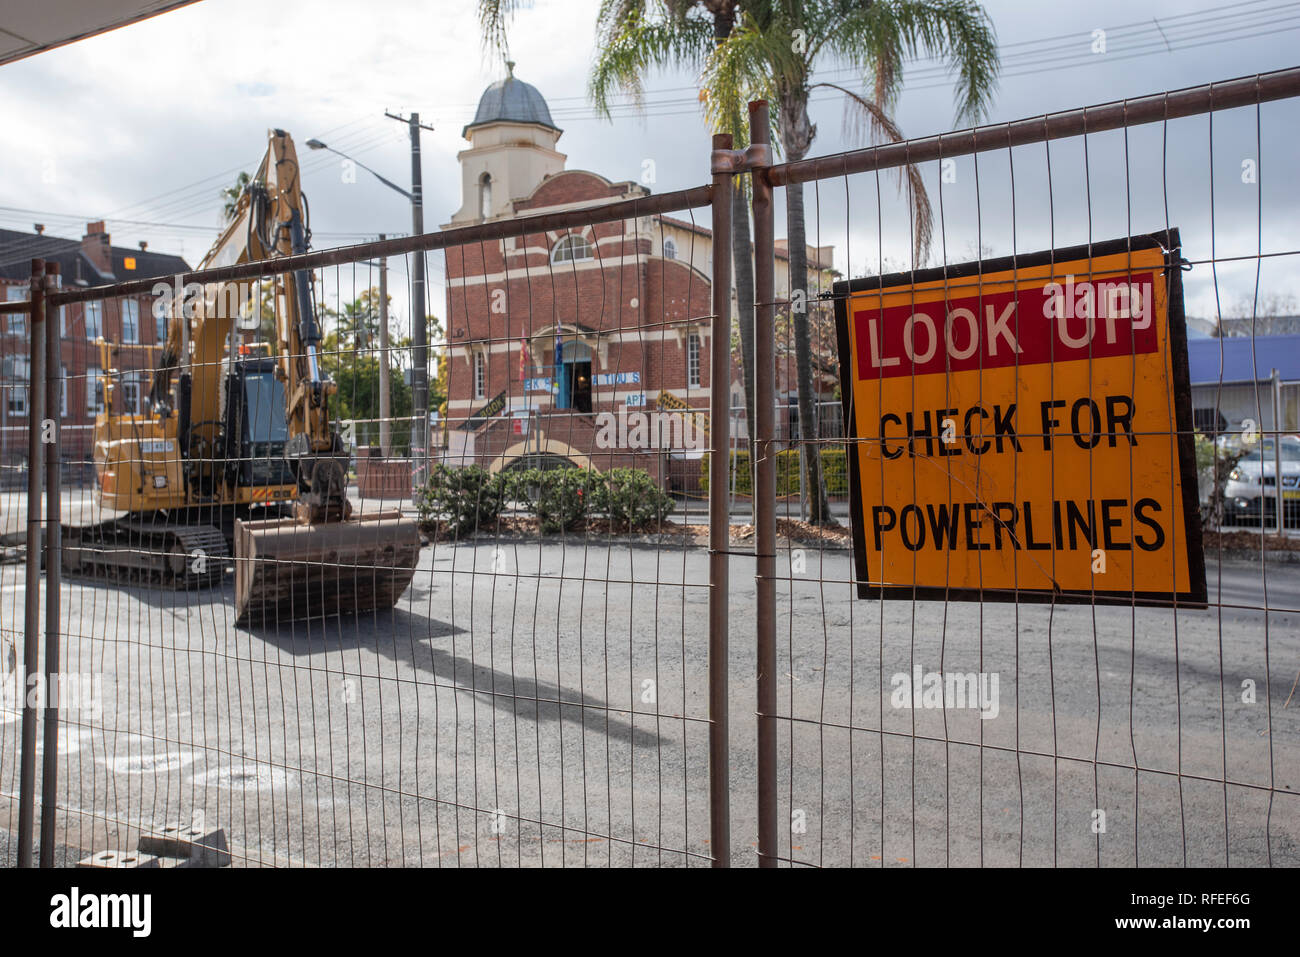 Excavator on road works behind temporary fence and warning sign Stock Photo